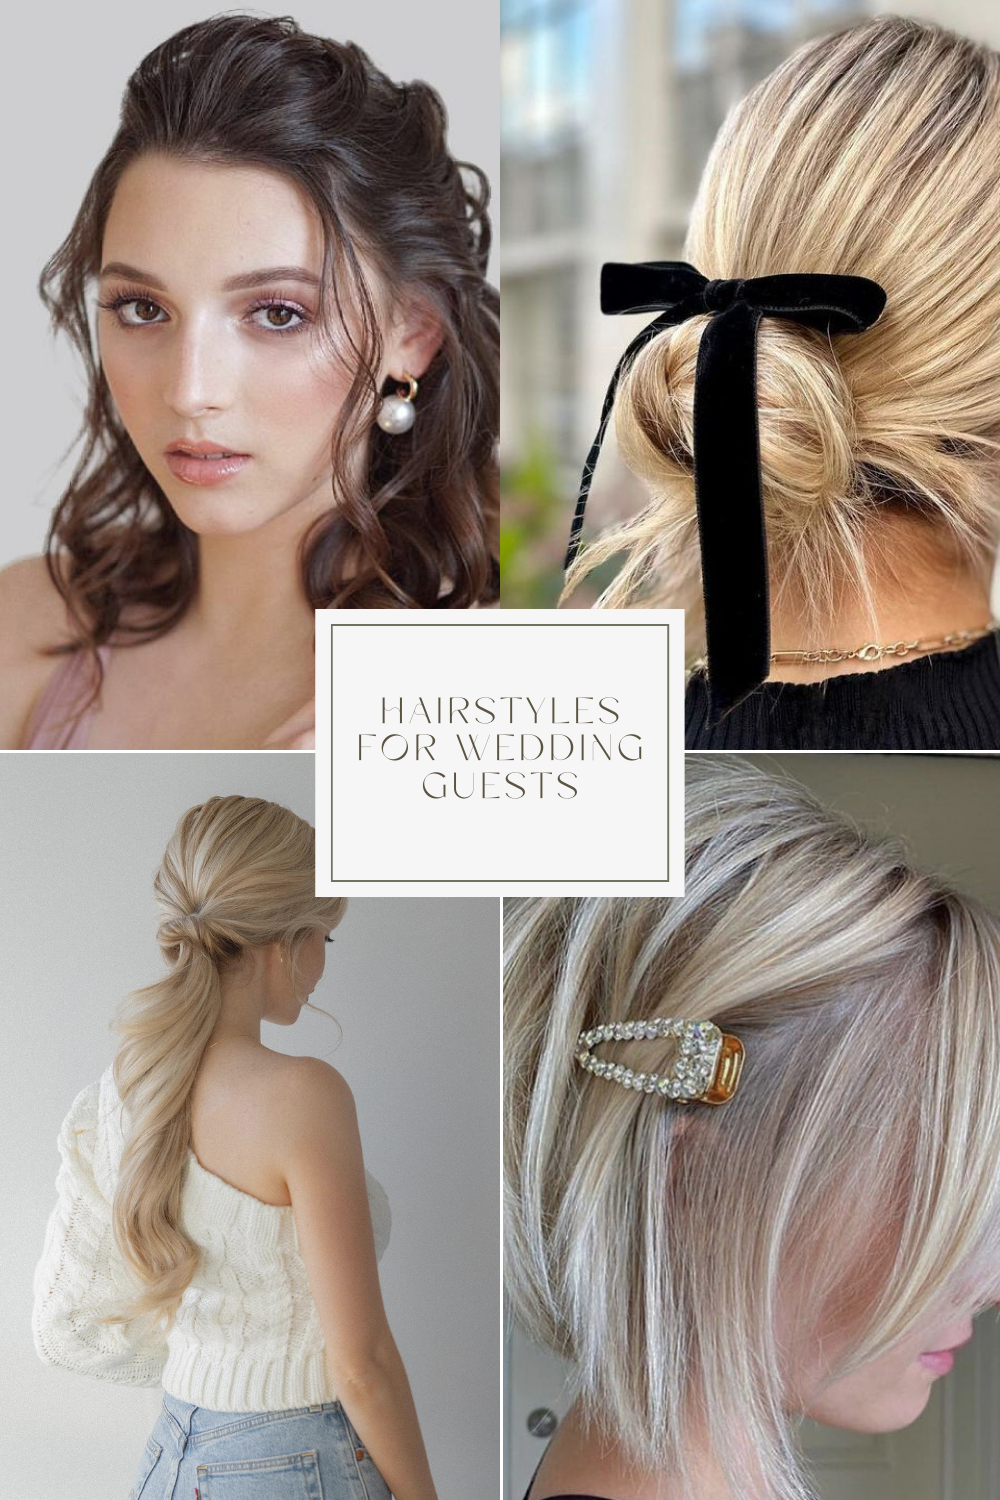 Hairstyles for wedding guests 